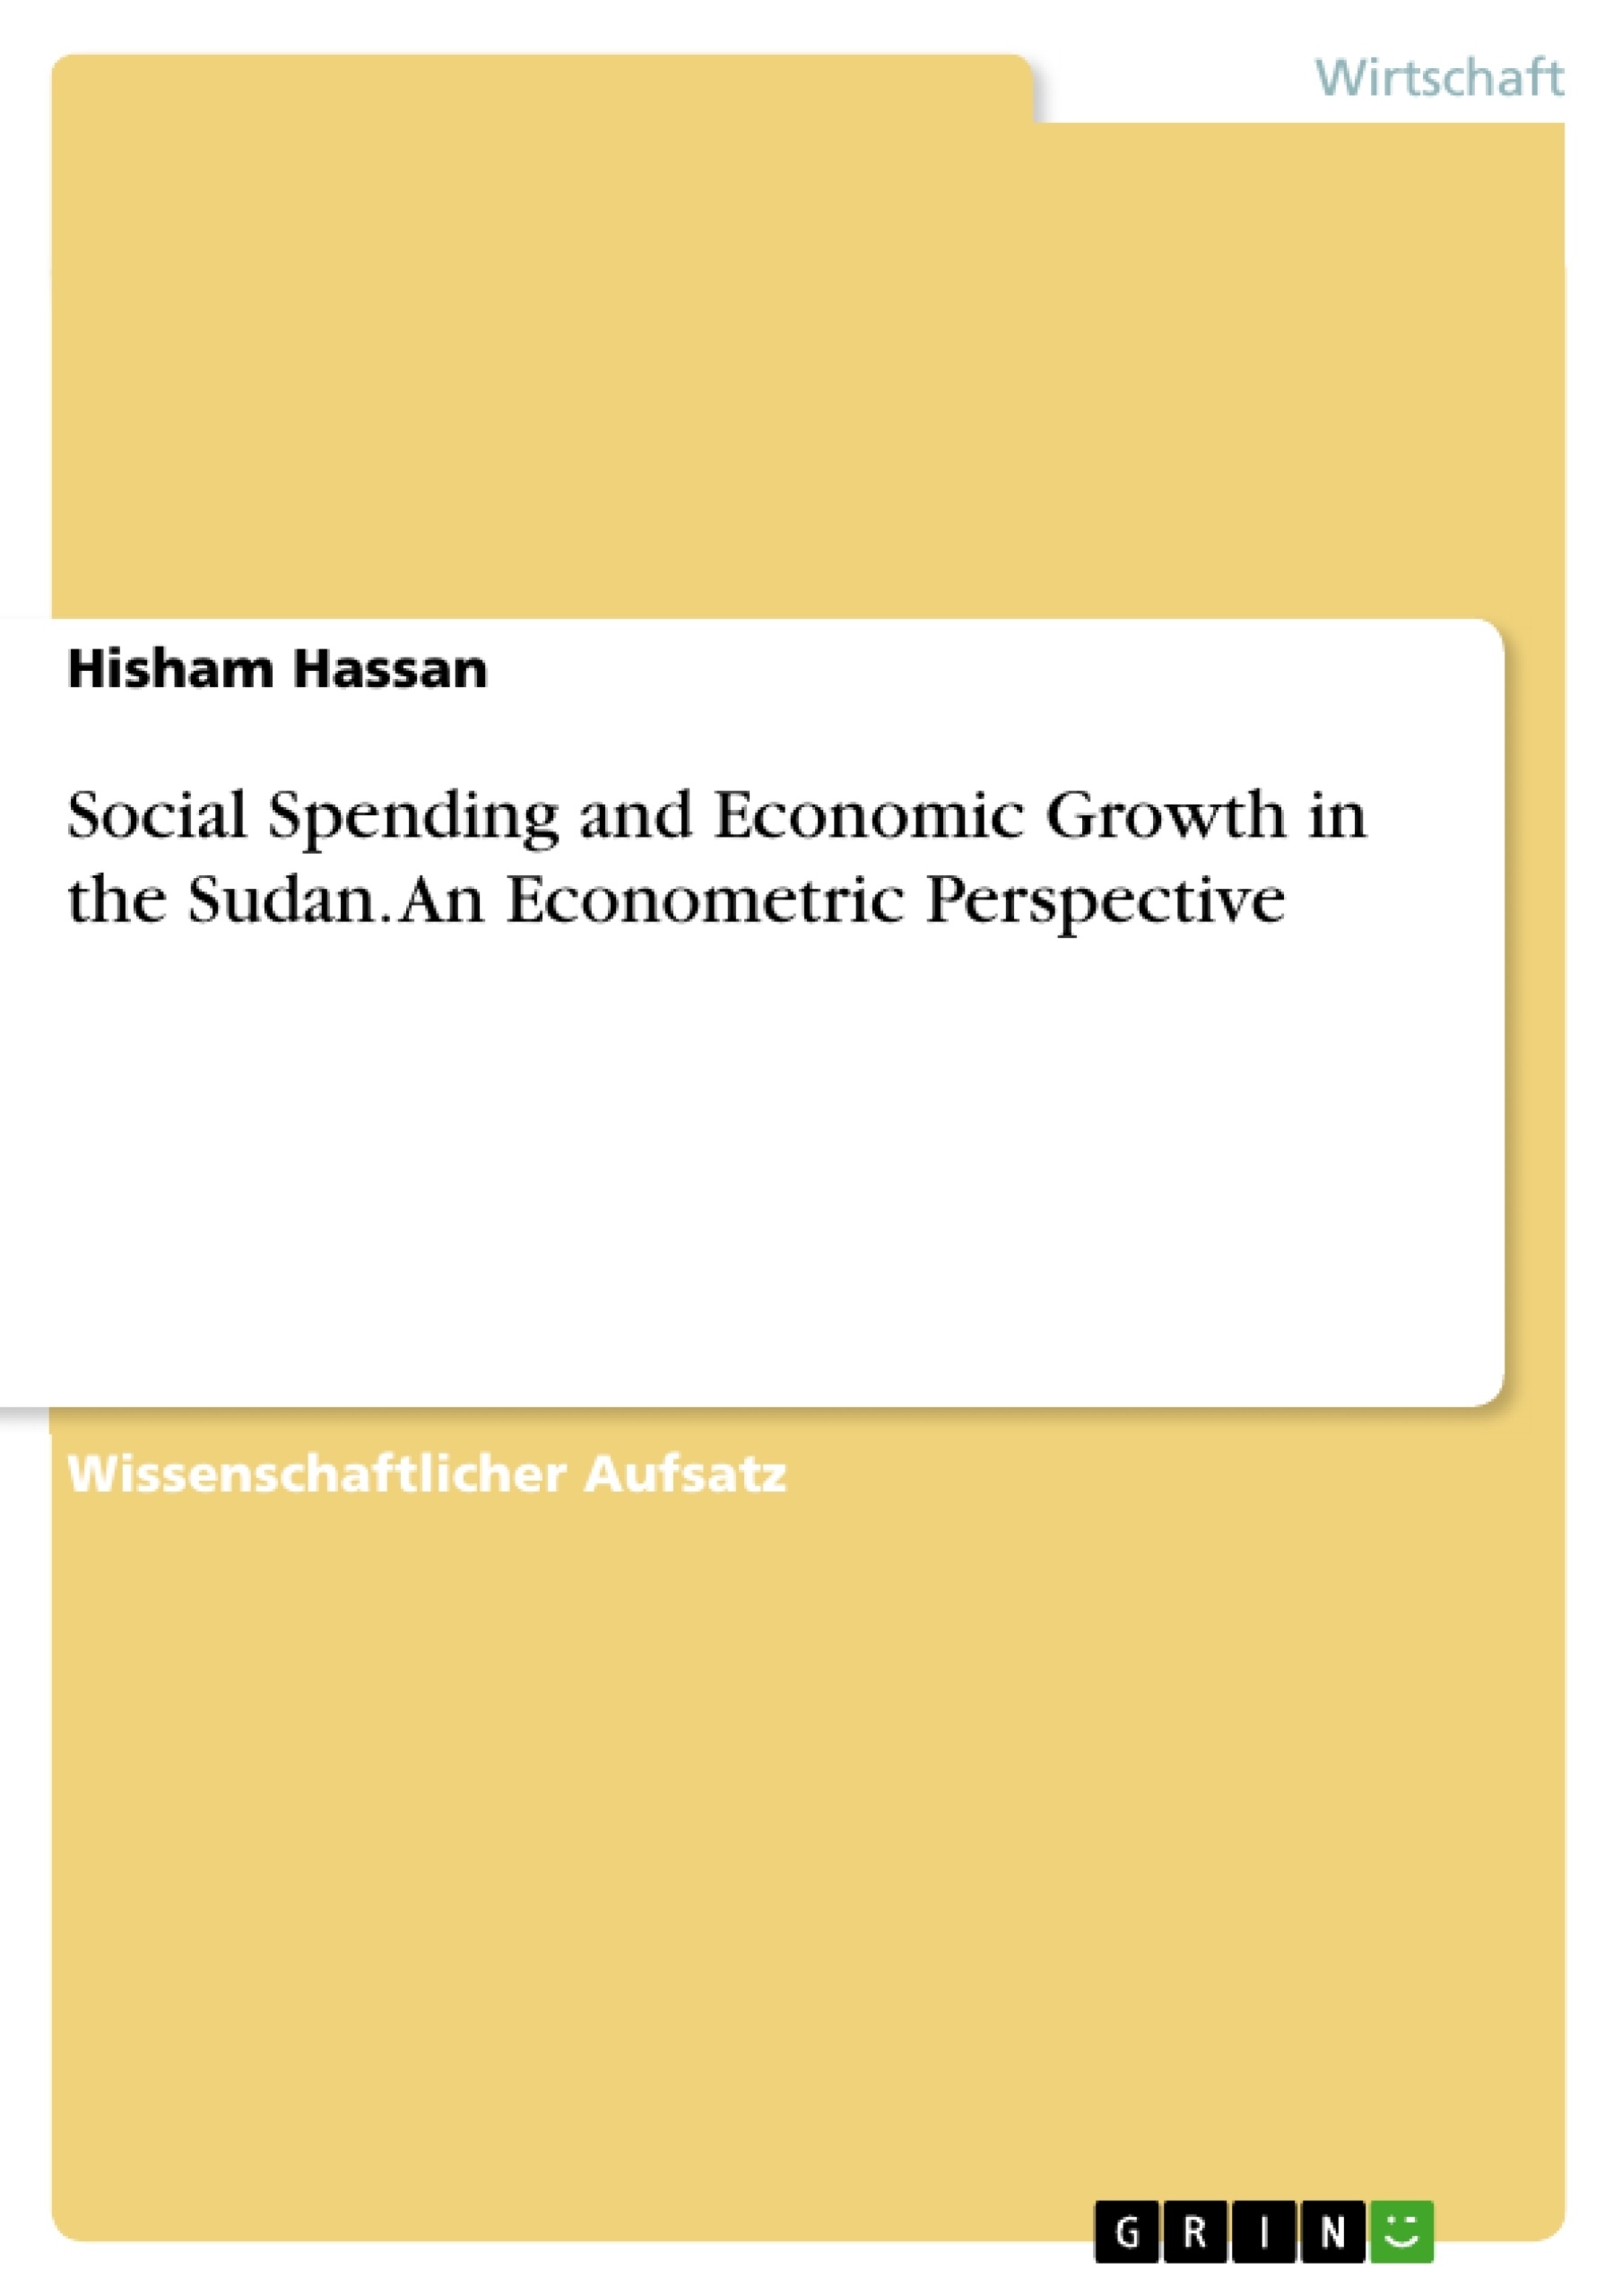 Titel: Social Spending and Economic Growth in the Sudan. An Econometric Perspective